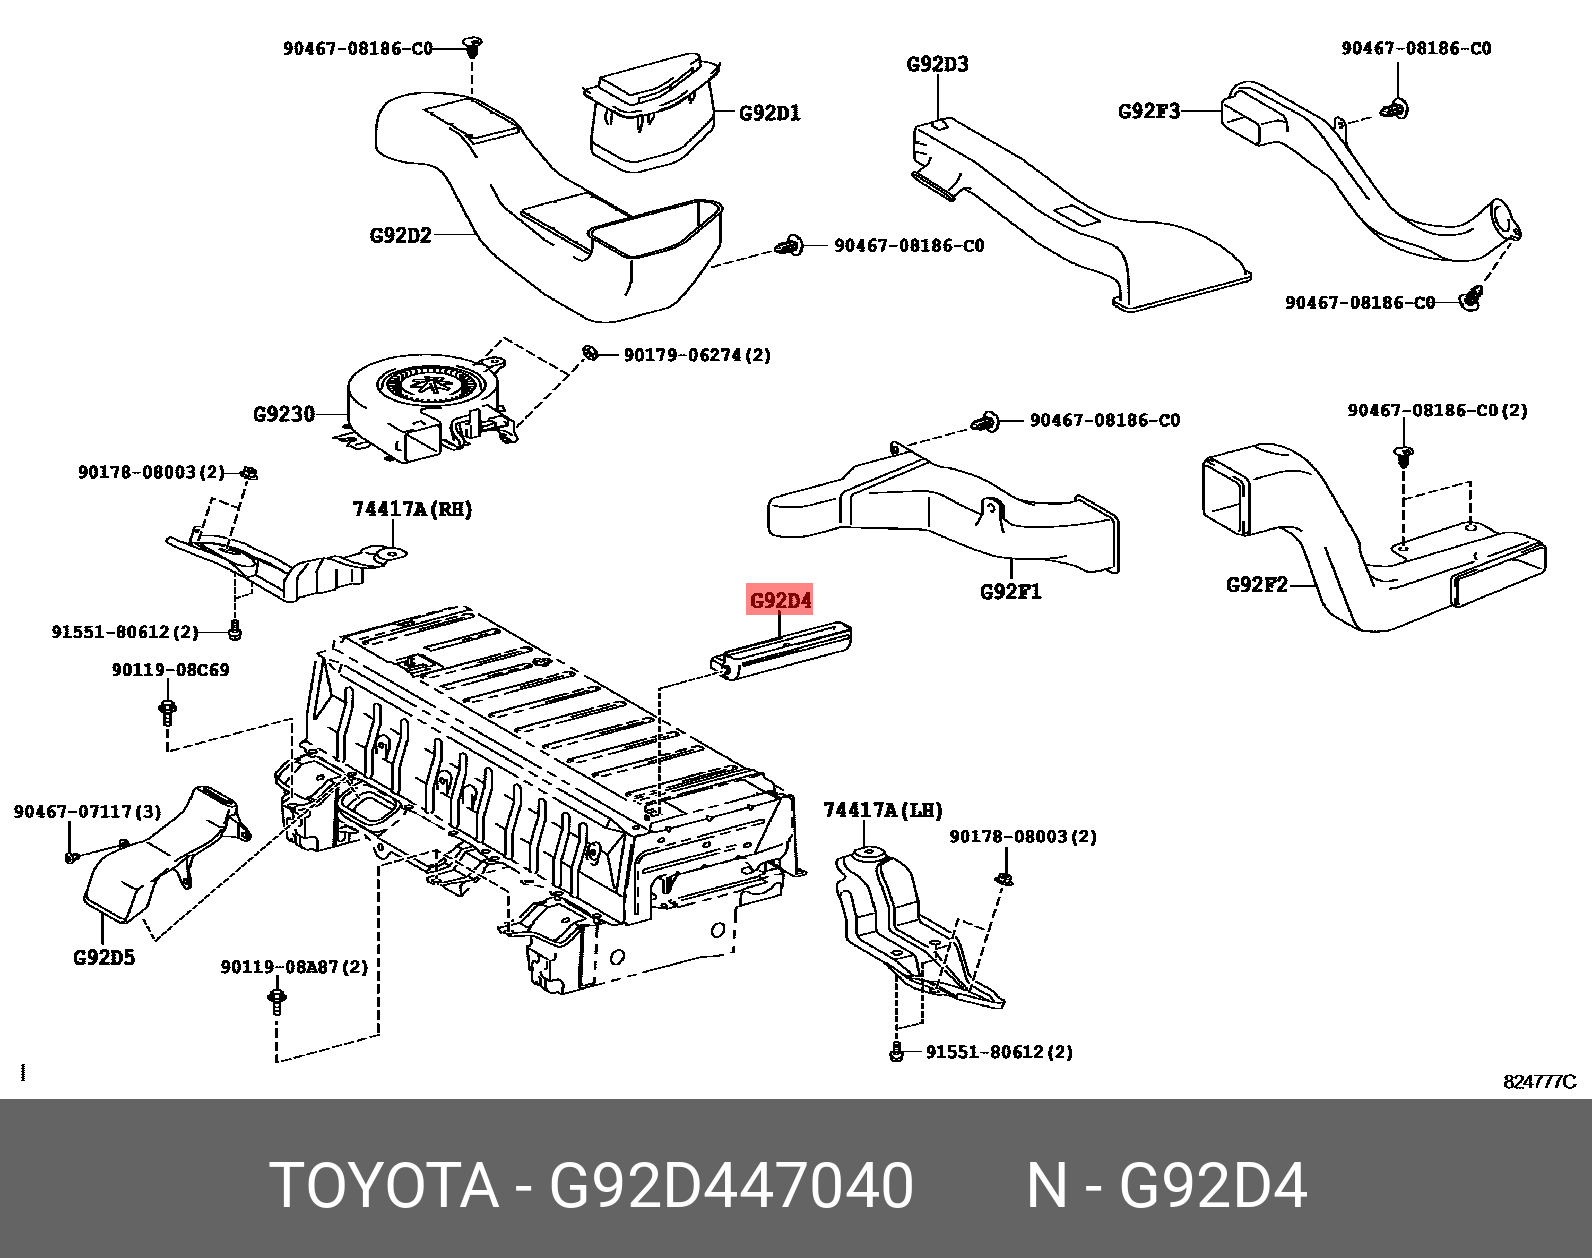 PRIUS (PLUG-IN HBD) 201201 - 201604, DUCT, HYBRID BATTERY INTAKE, NO.4